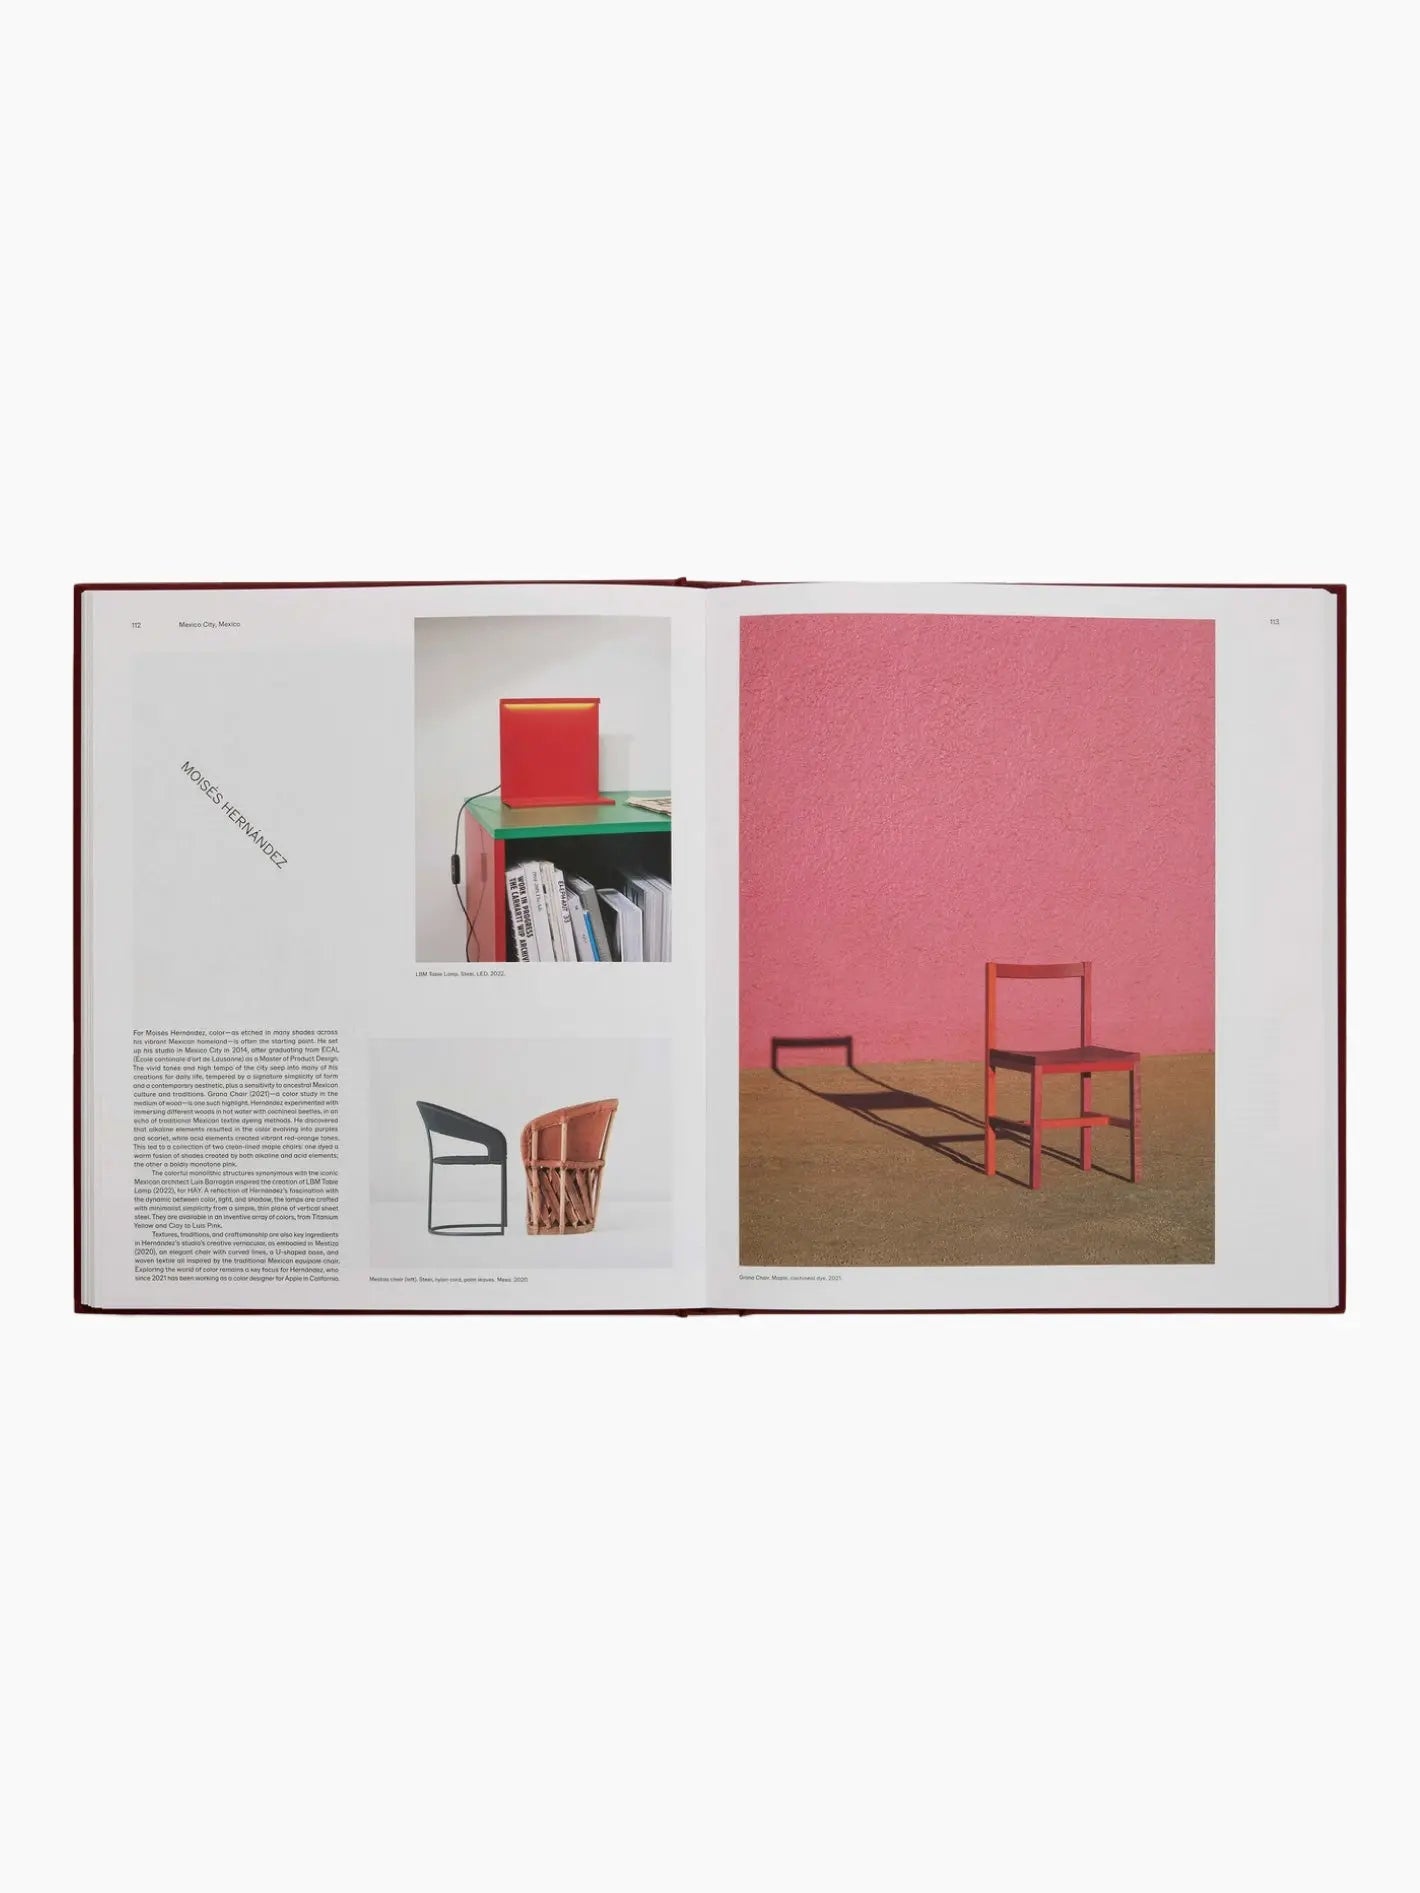 The image shows a maroon book titled "Designed for Life: The World’s Best Product Designers" by Phaidon. Available at BassalStore in Barcelona, the cover features various thin white outlines of abstract shapes and product designs.